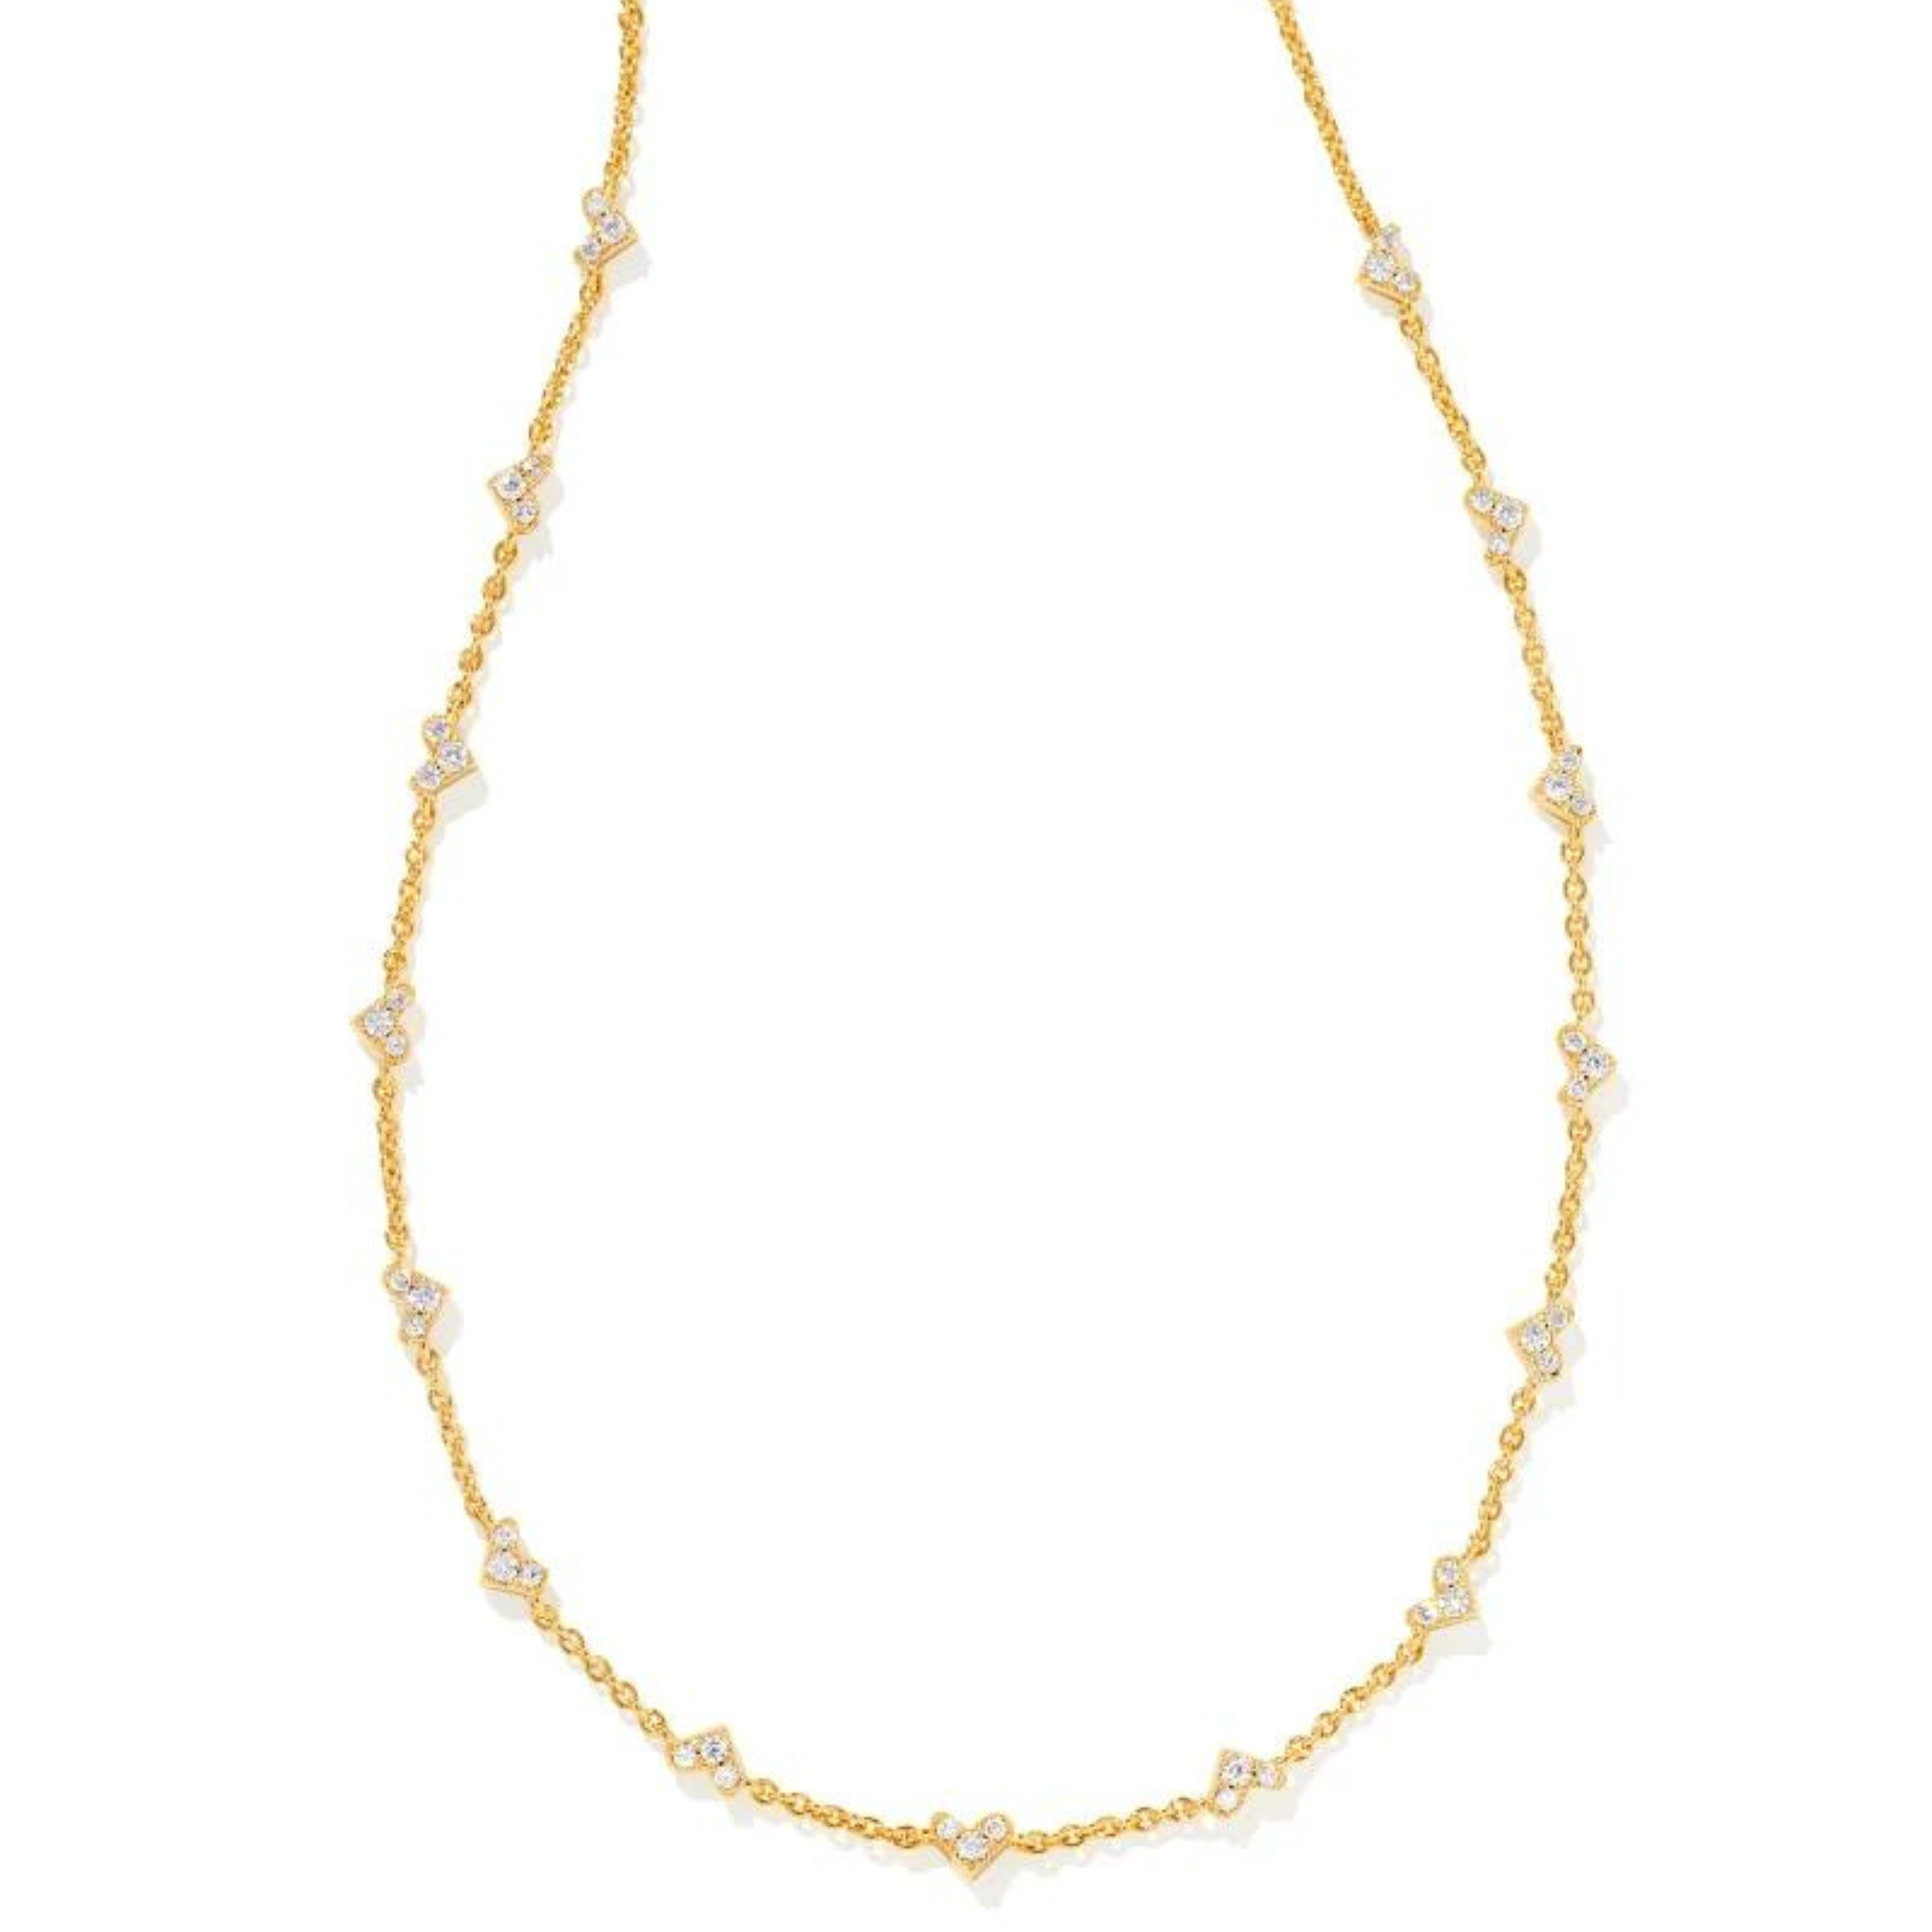 Thin, gold chain necklace with small, heart clear crystal pendants pictured on a white background. 